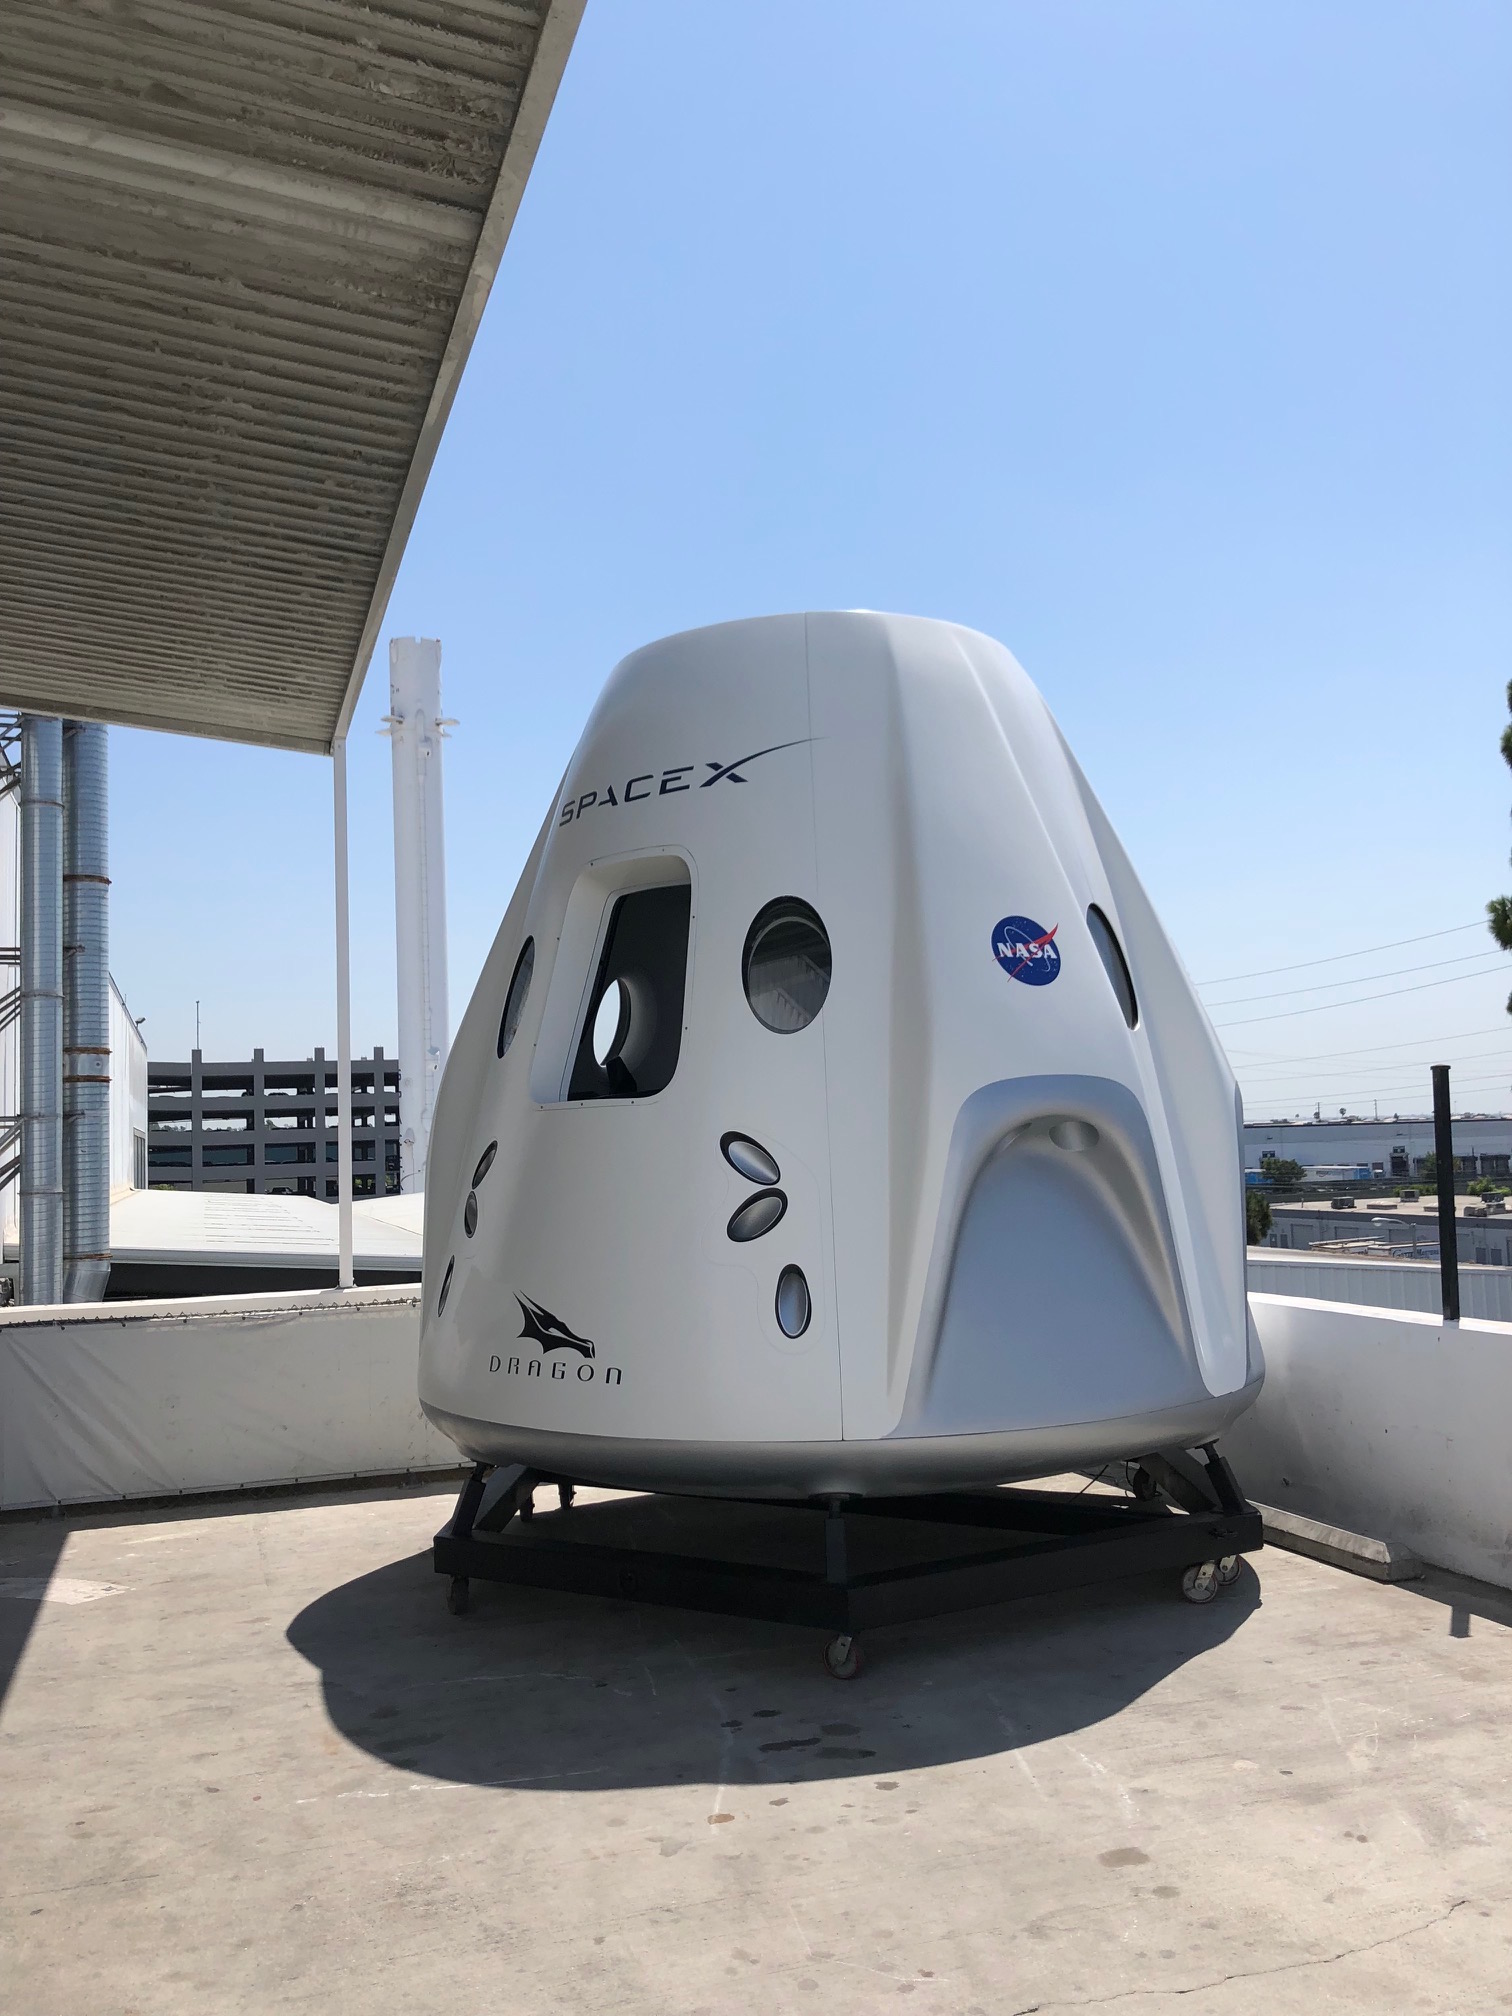 Step Inside SpaceX's New Crew Dragon Spaceship (Photos) Space